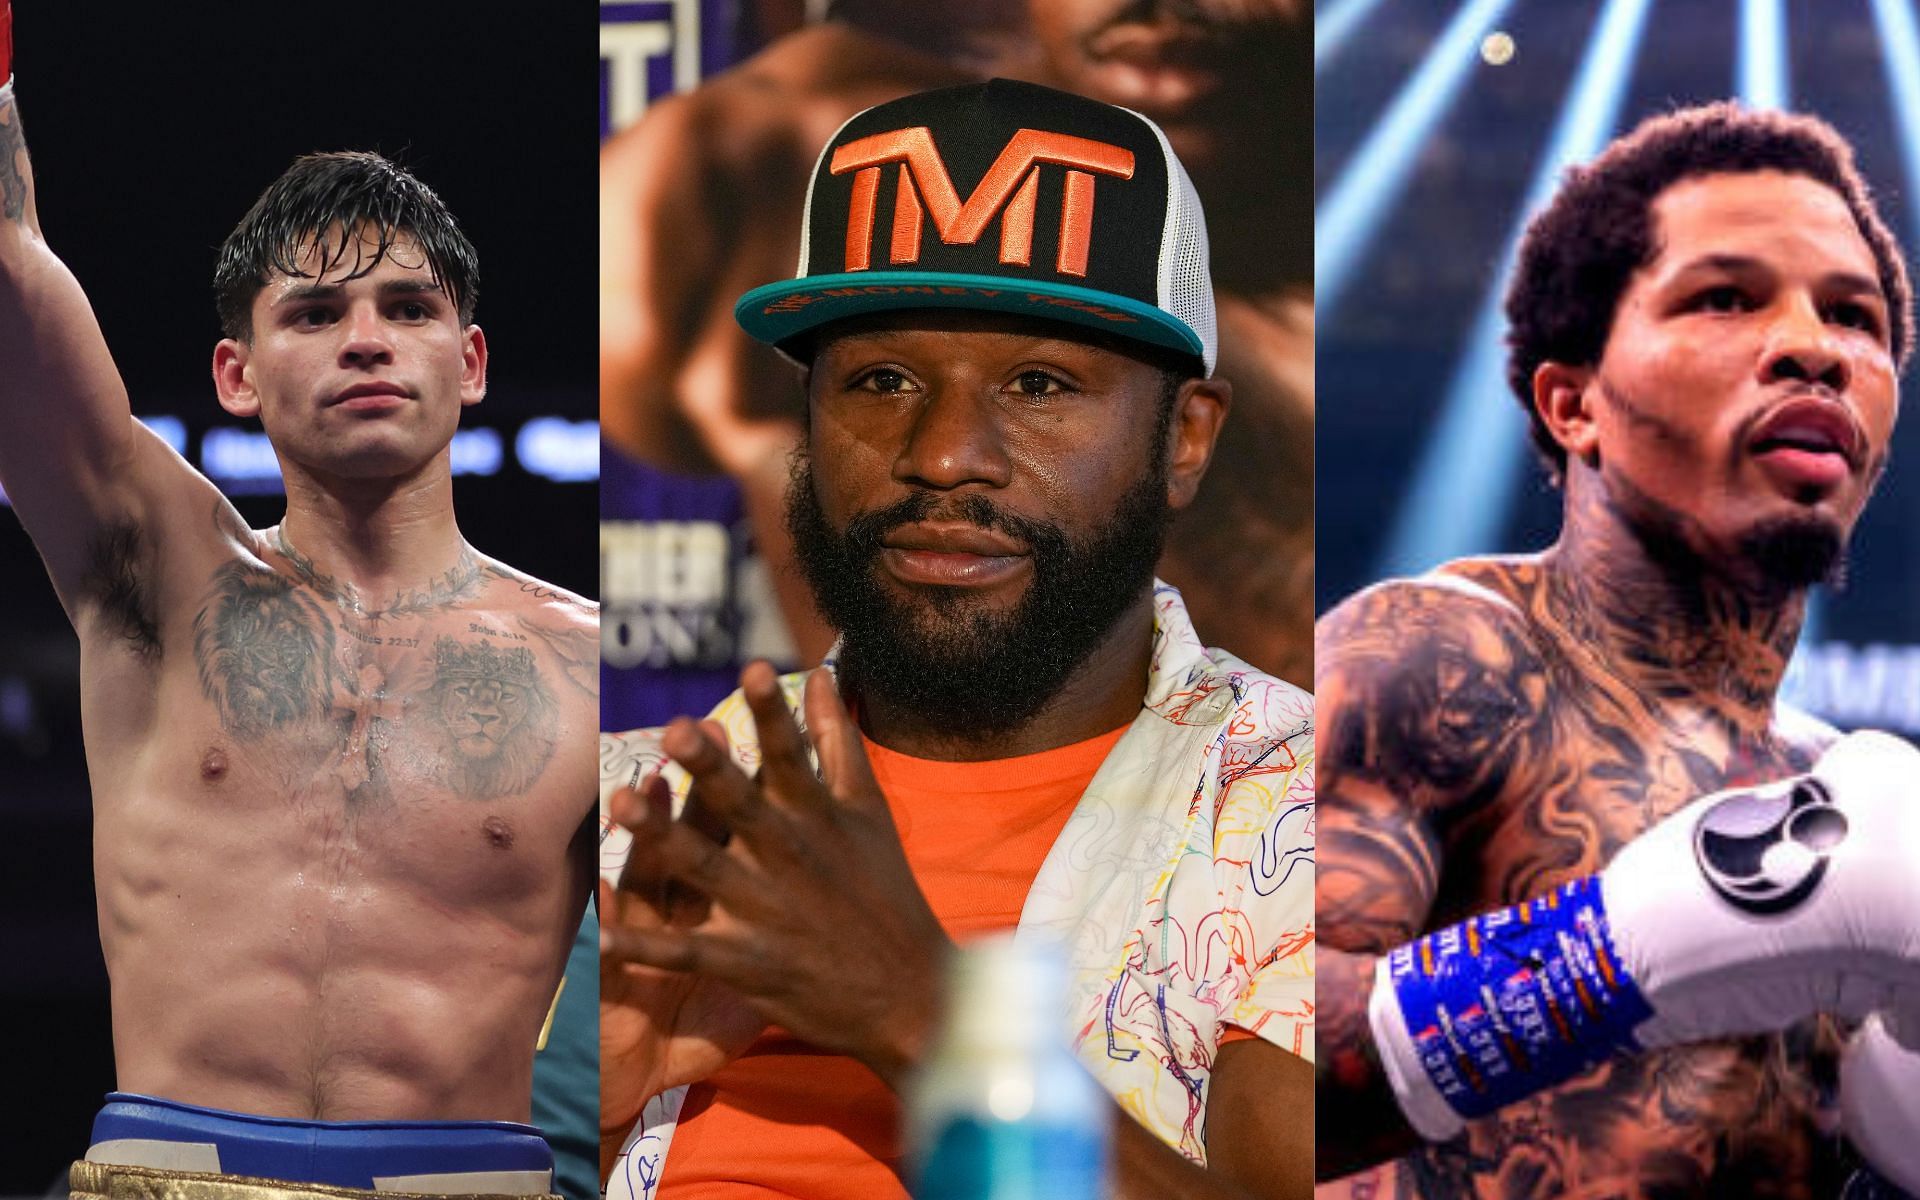 Ryan Garcia (left), Floyd Mayweather (center), and Gervonta Davis (right) (Image credits Getty Images)